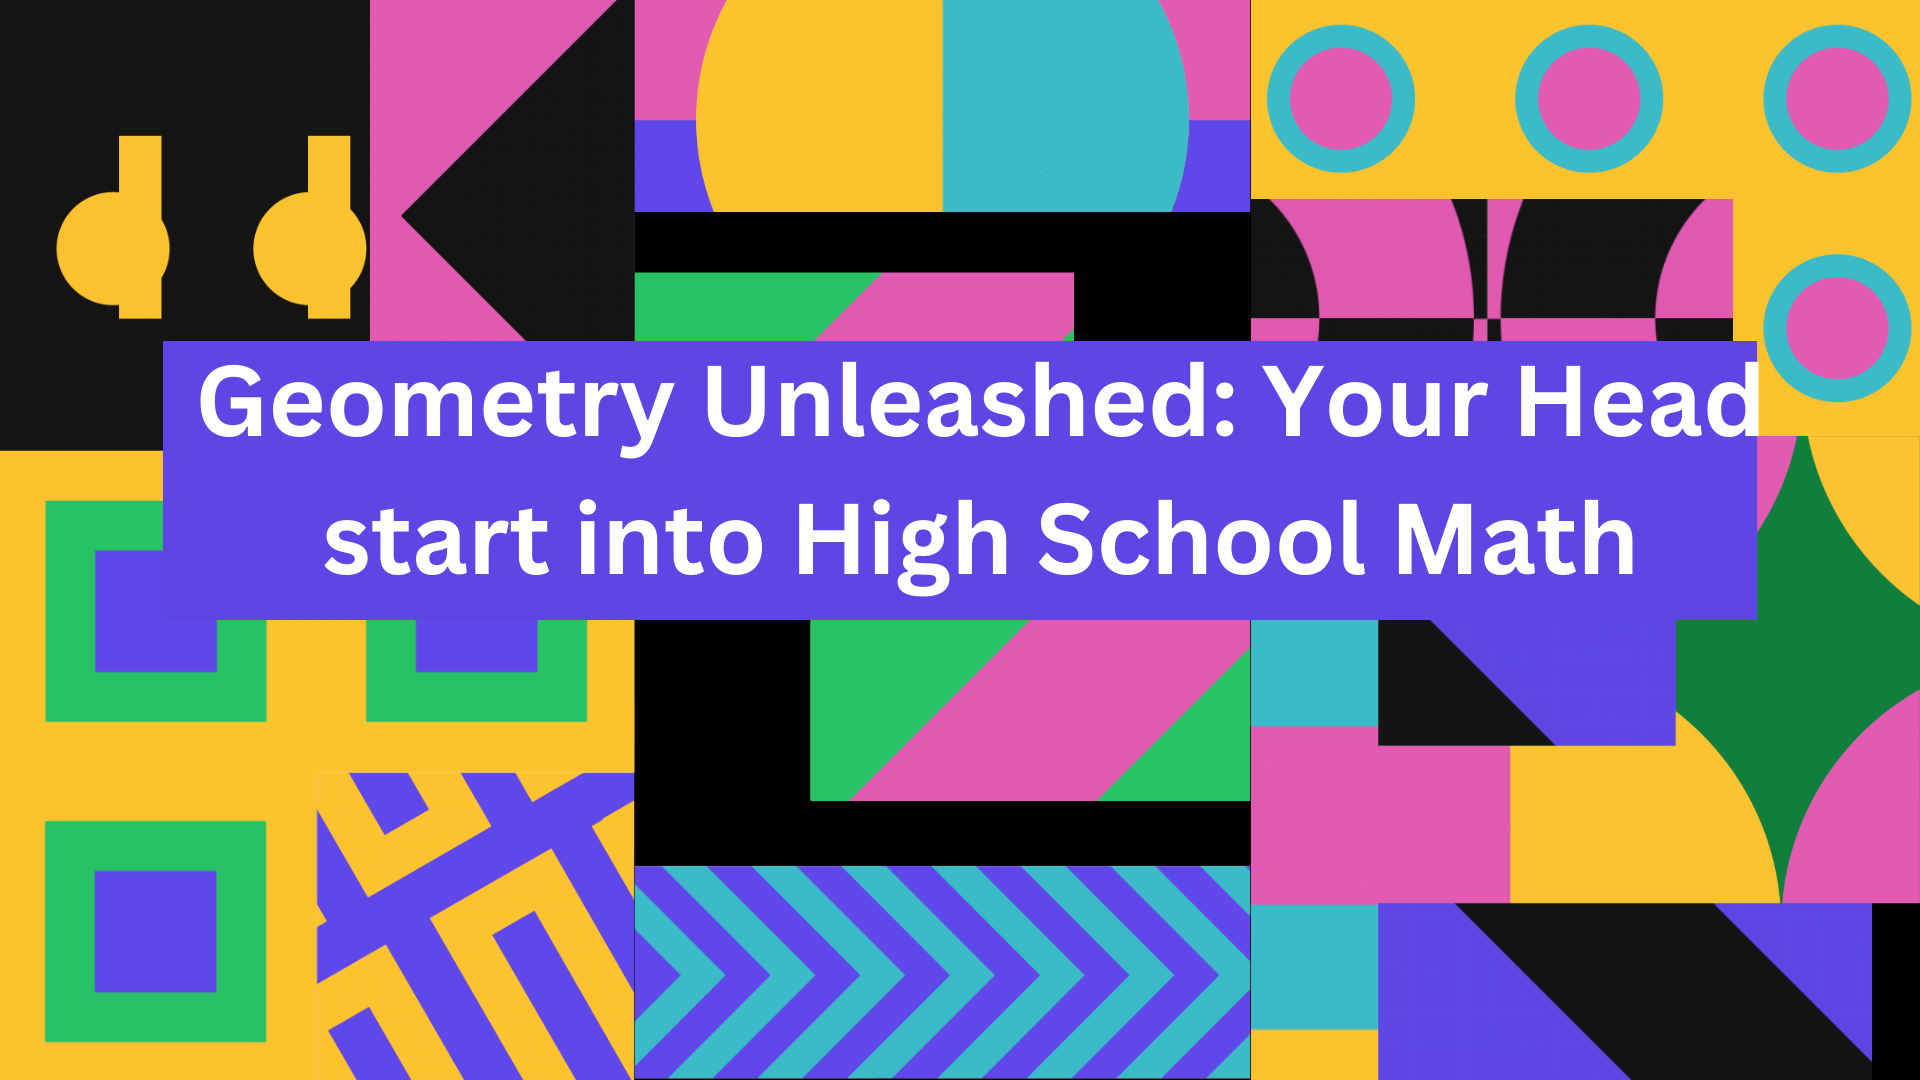 Geometry Unleashed: Your Head start into High School Math